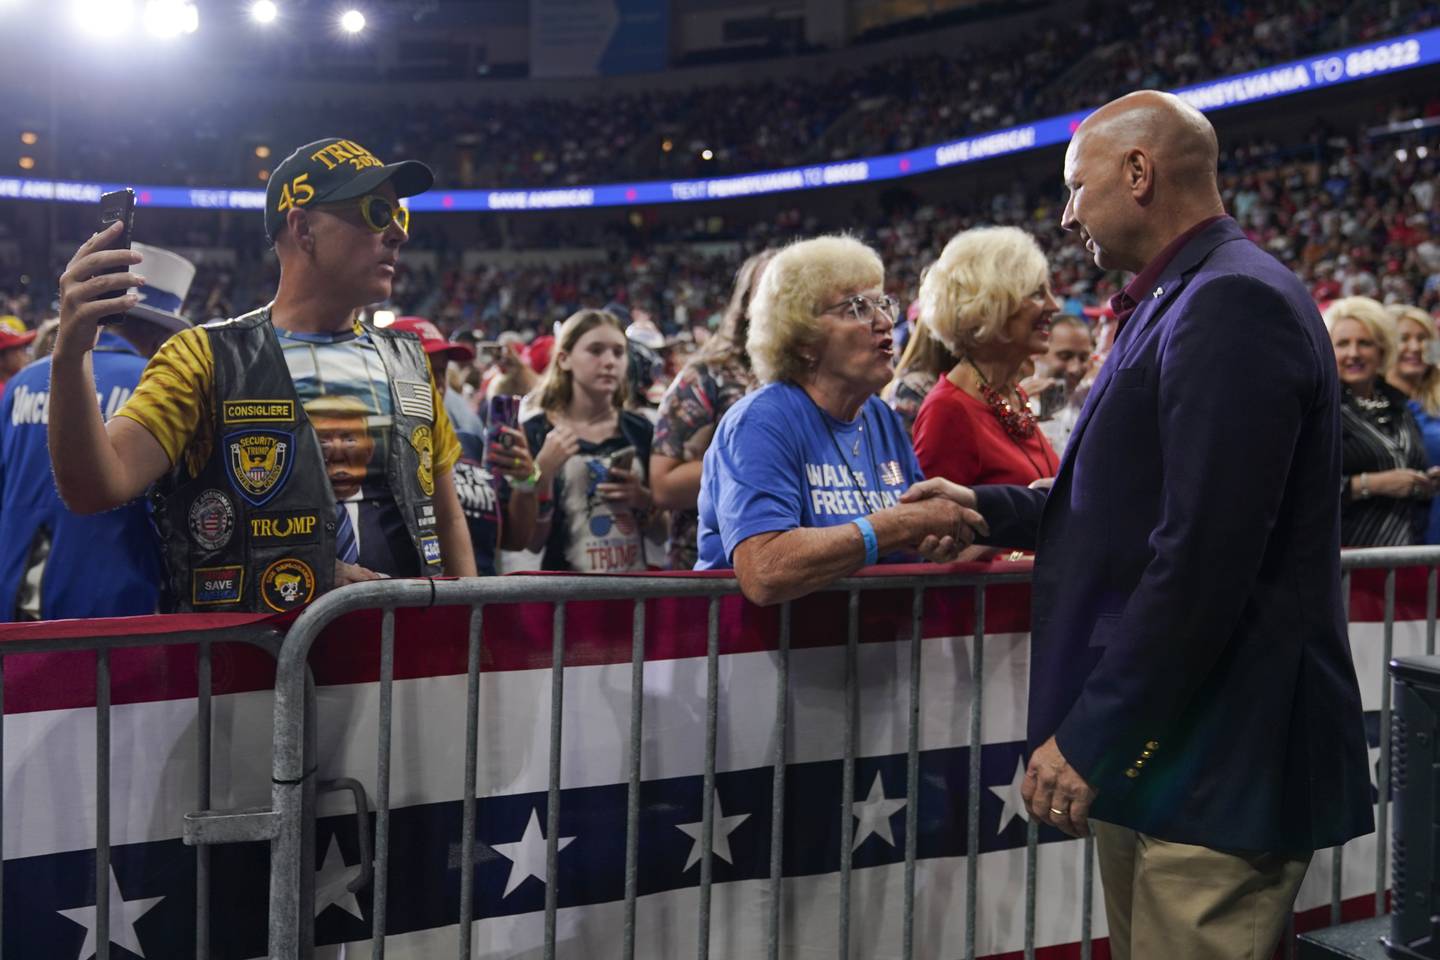 Pennsylvania Republican gubernatorial candidate Doug Mastriano, right, greets supporters before former President Donald Trump speaks at a rally in Wilkes-Barre, Pa., Saturday, Sept. 3, 2022. (AP Photo/Mary Altaffer)